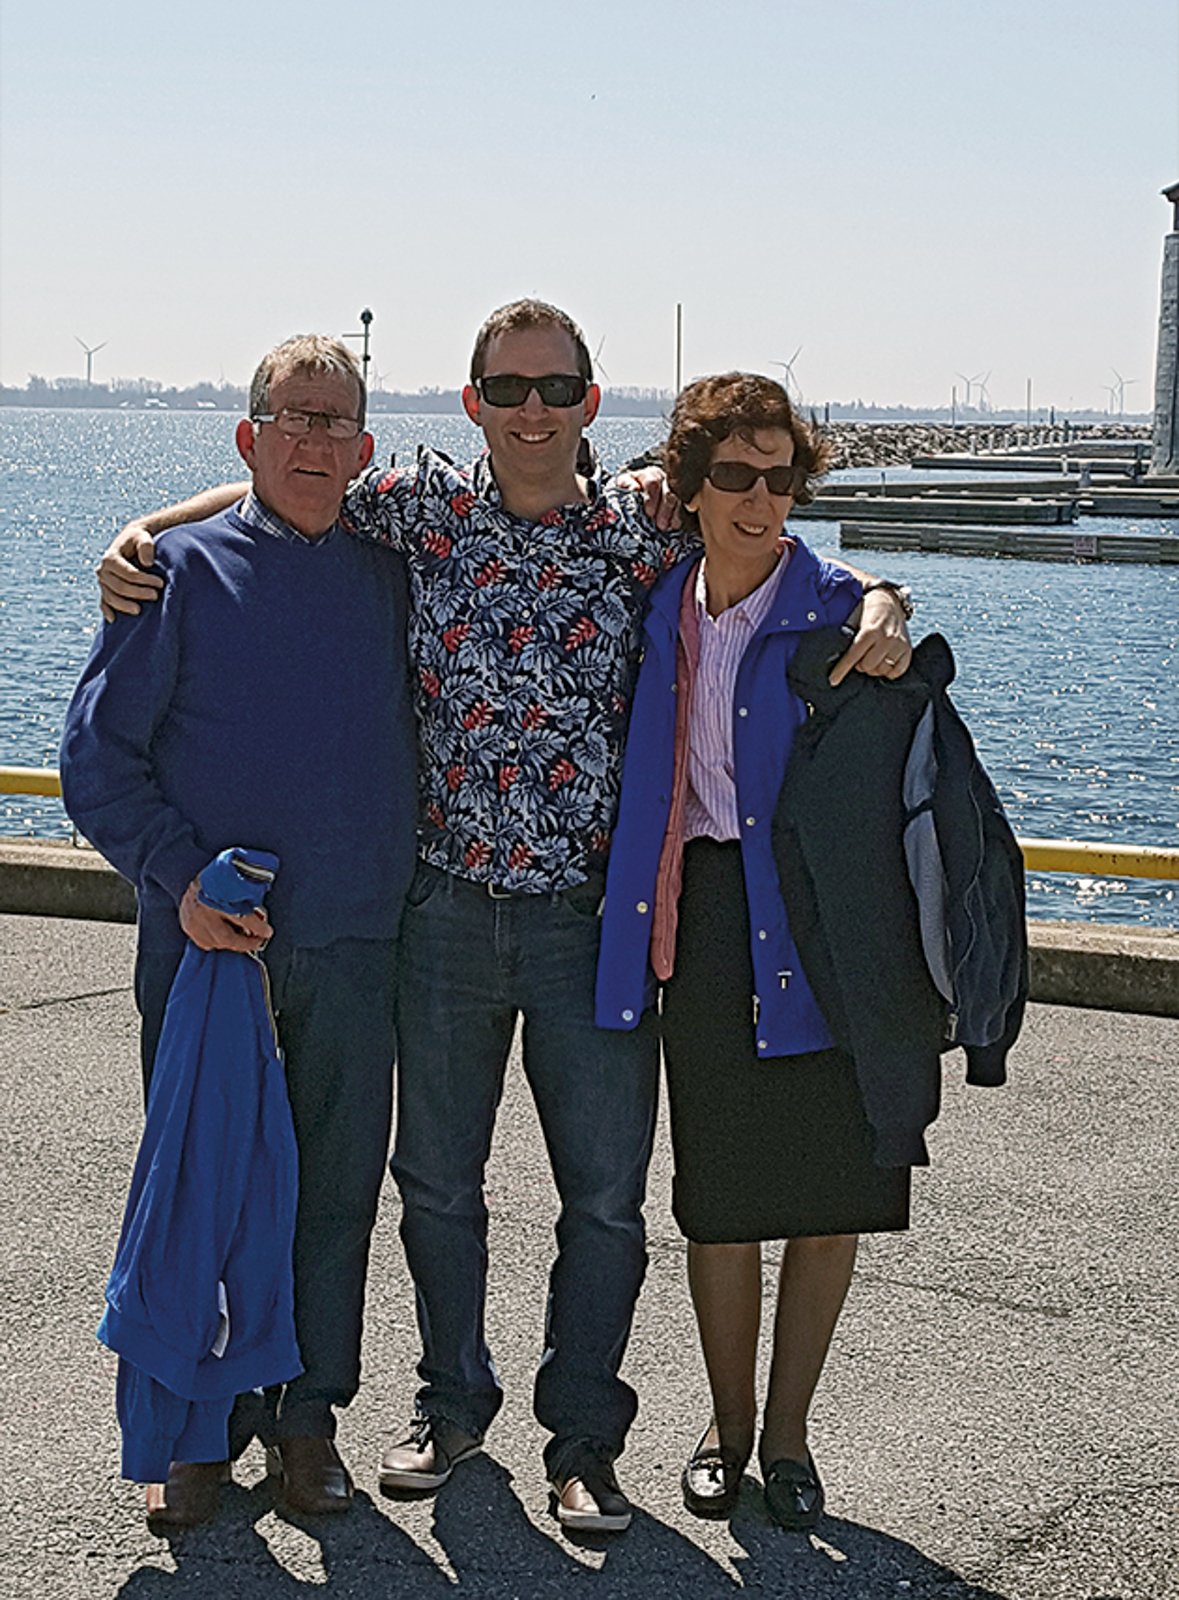 Colm and his parents about to board a cruise in Kingston Ontario, May 2019.